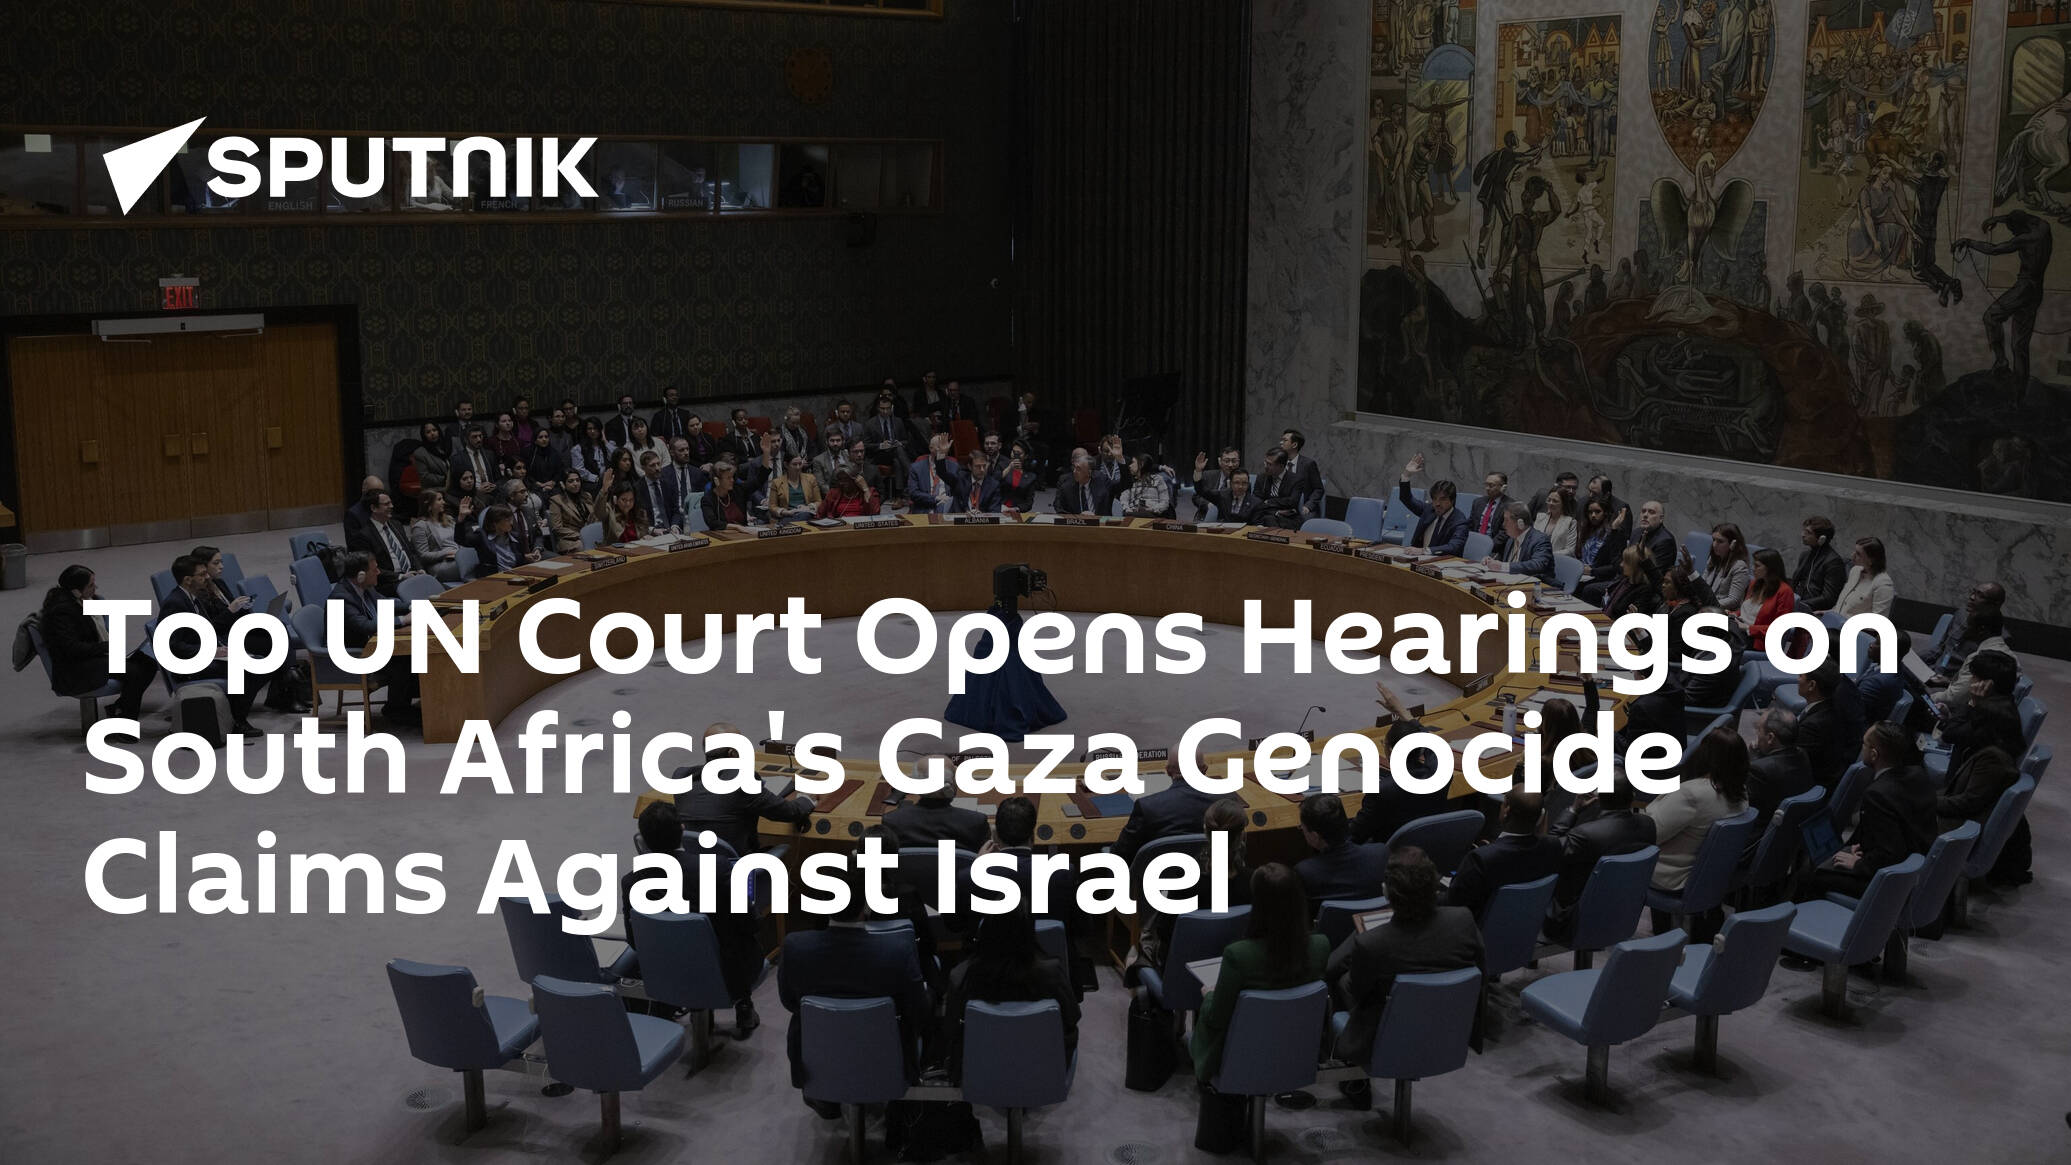 Top UN Court Opens Hearings on South Africa's Gaza Genocide Claims Against Israel